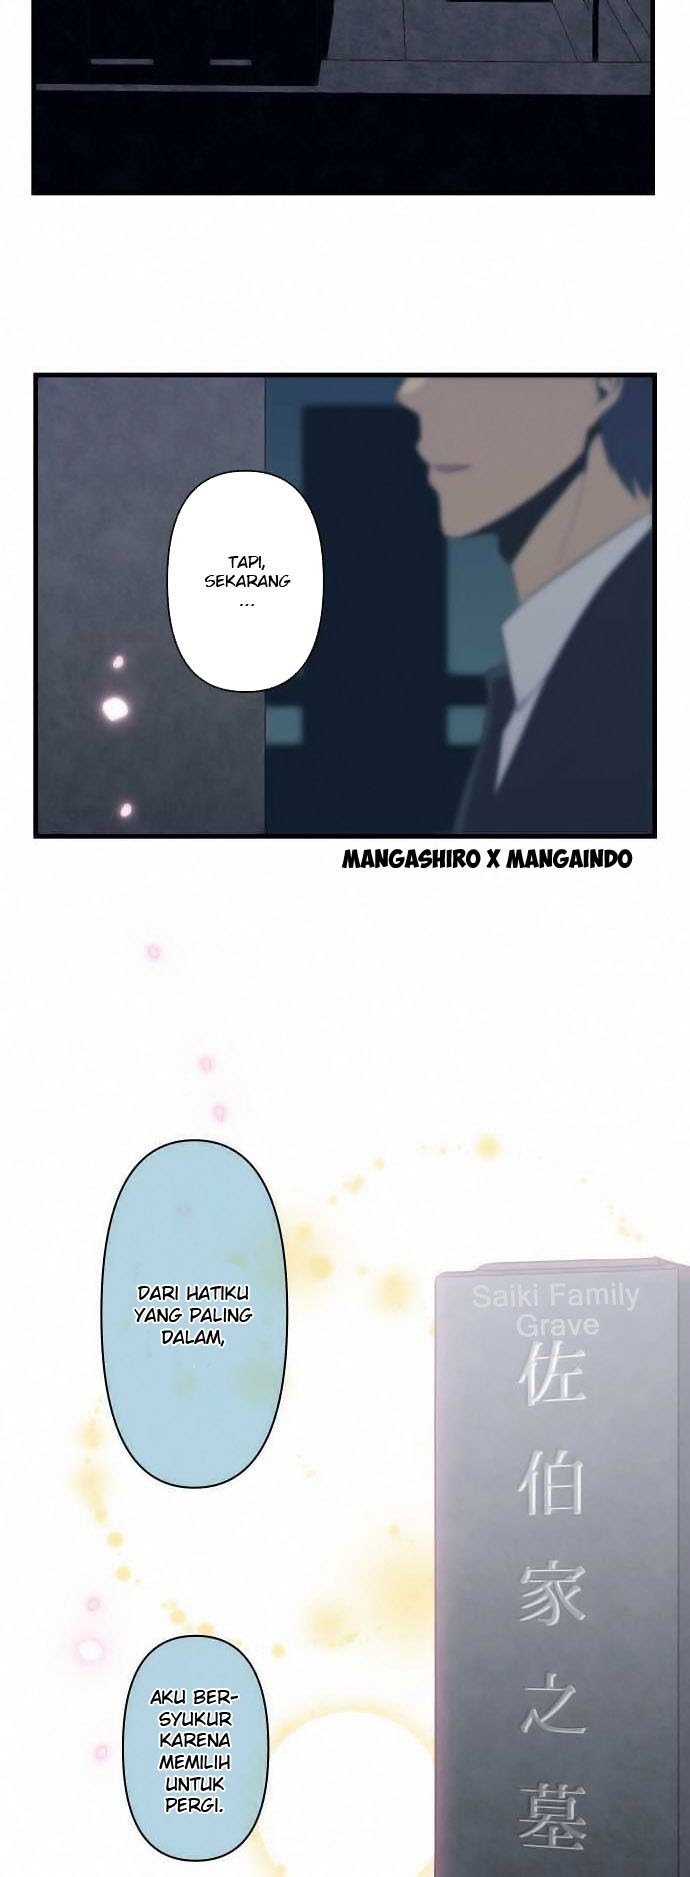 ReLife Chapter 91